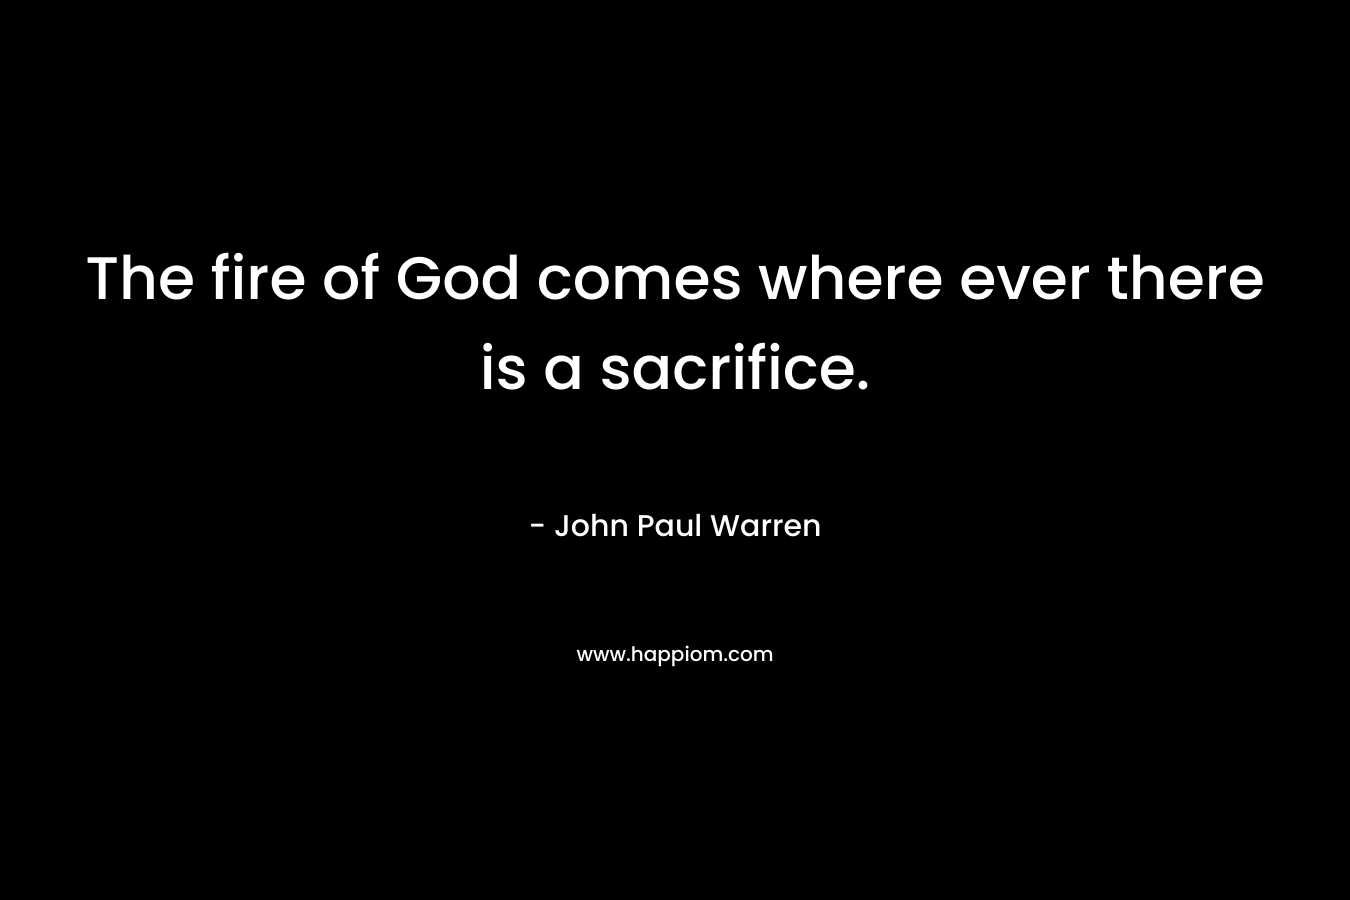 The fire of God comes where ever there is a sacrifice. – John Paul Warren